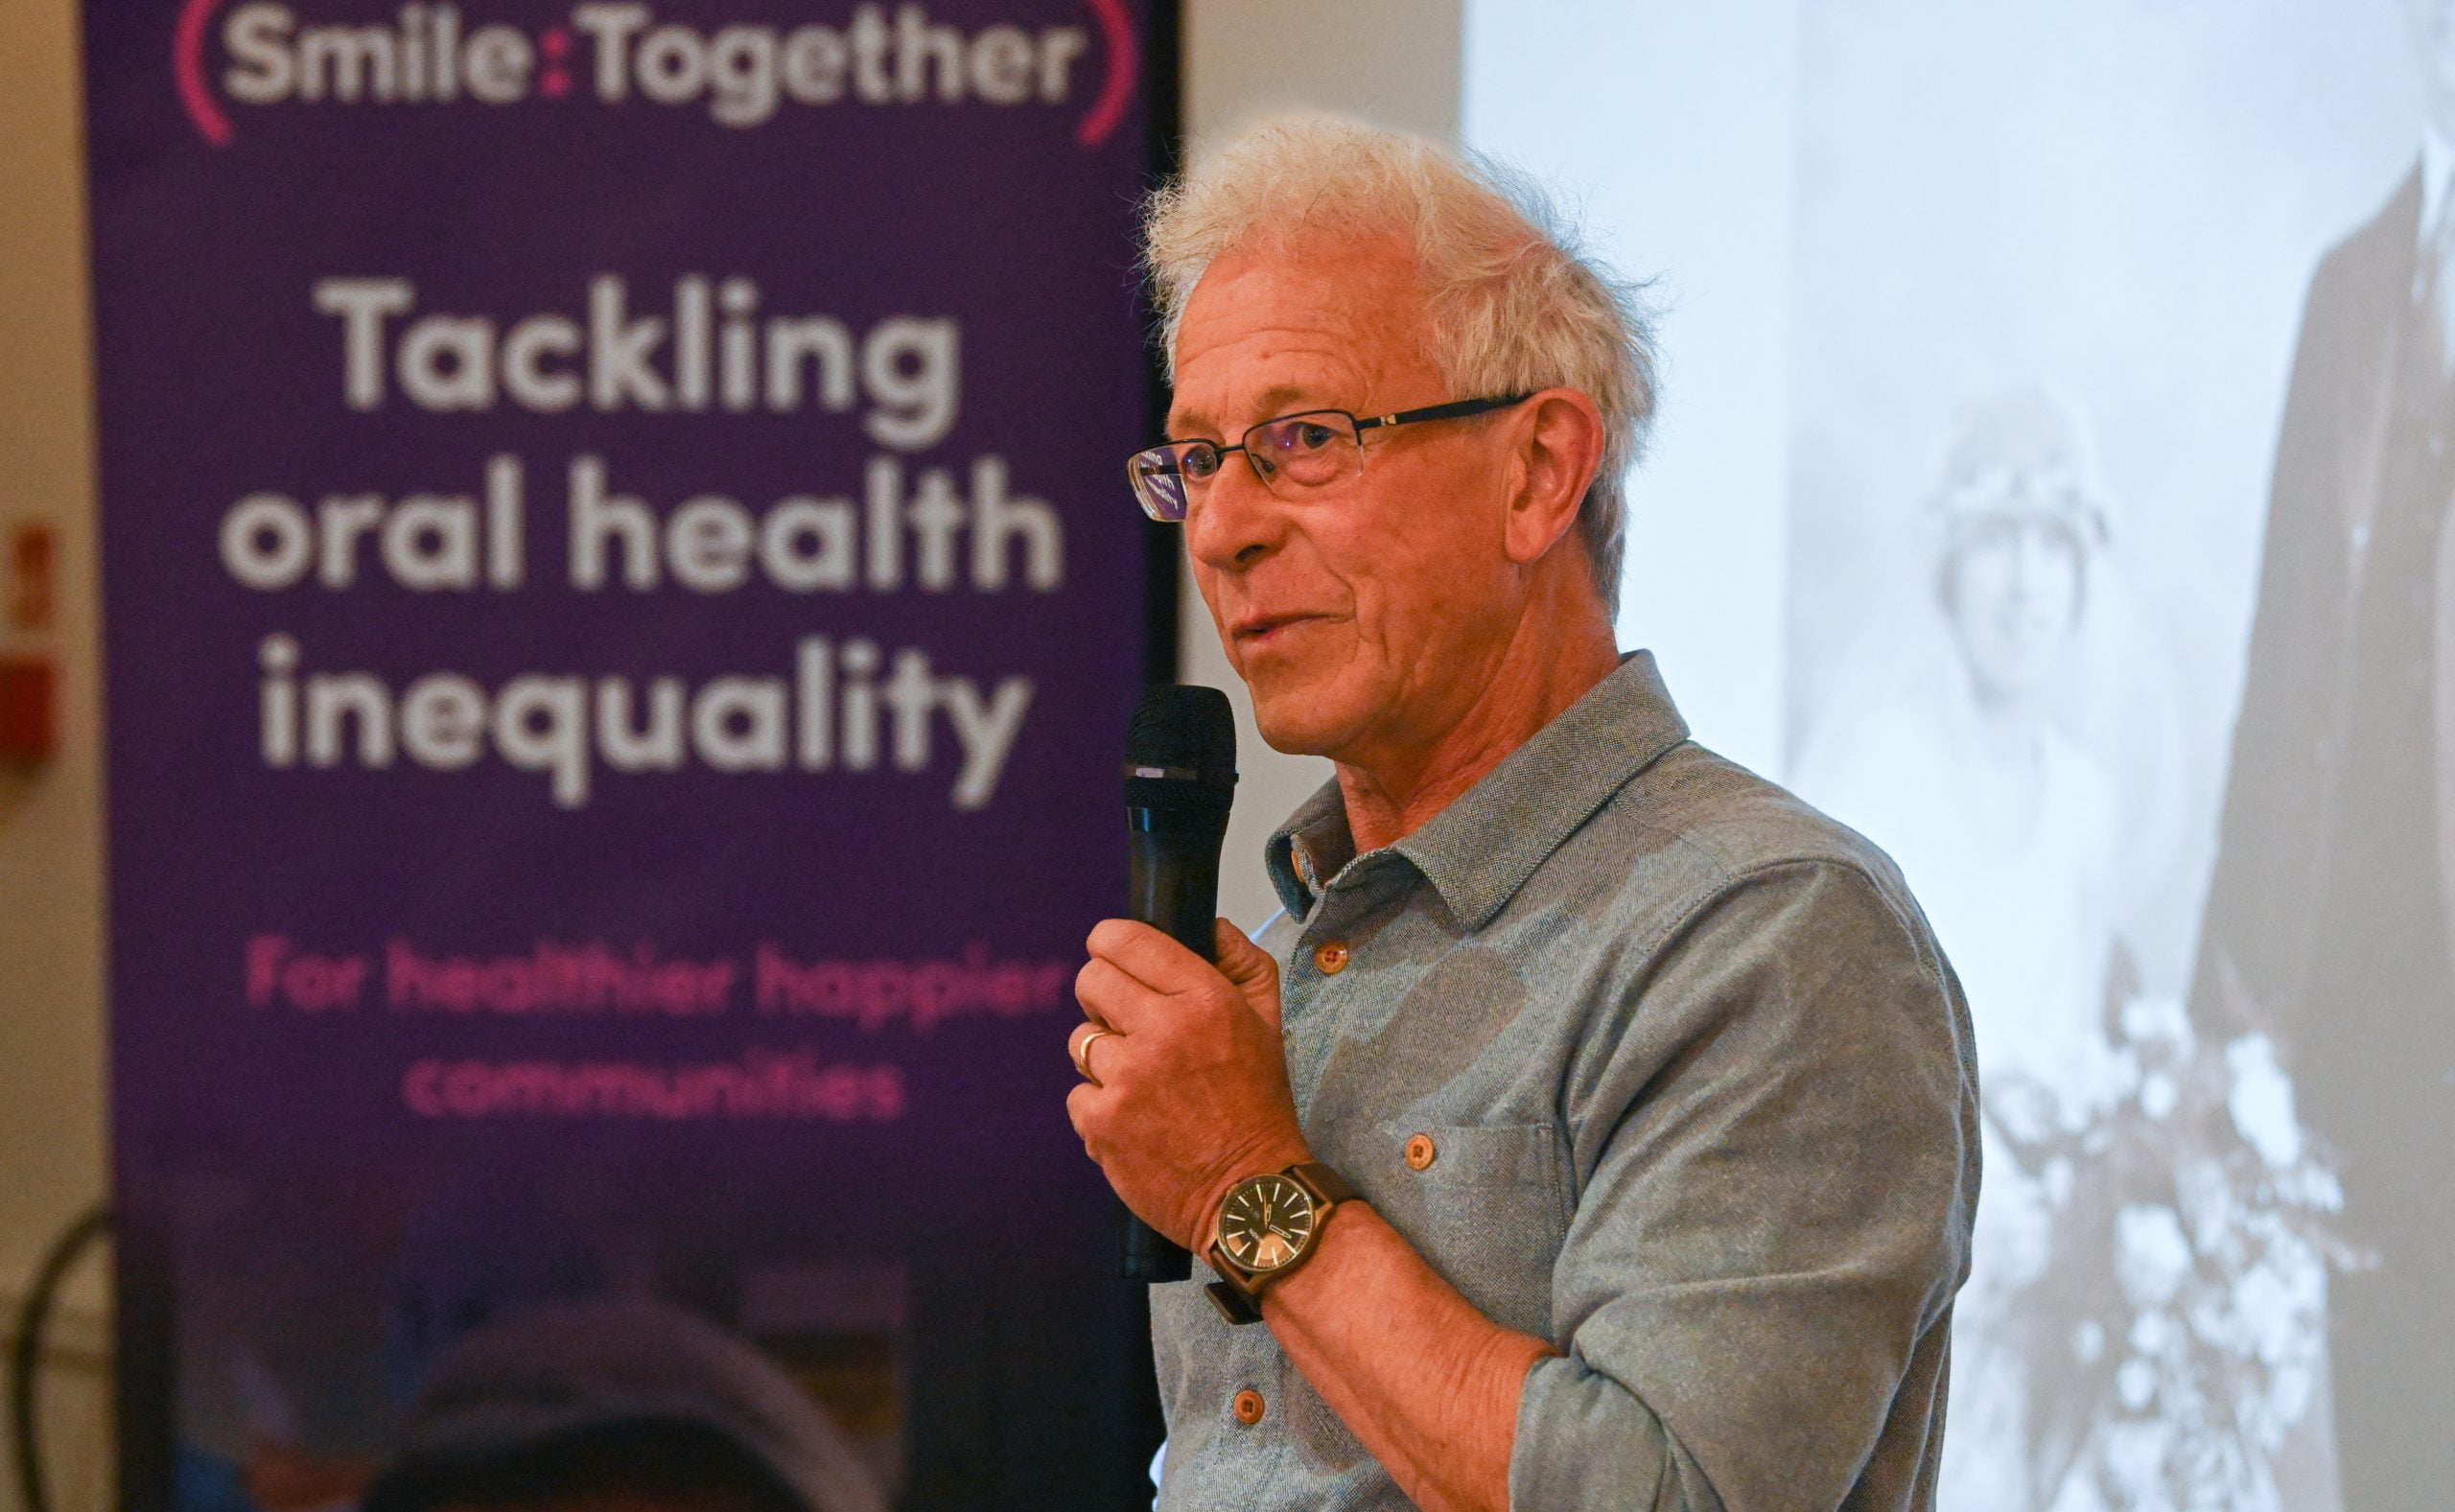 Chris Hines talking into mic with Smile Together 'tackling oral health inequality' poster in background